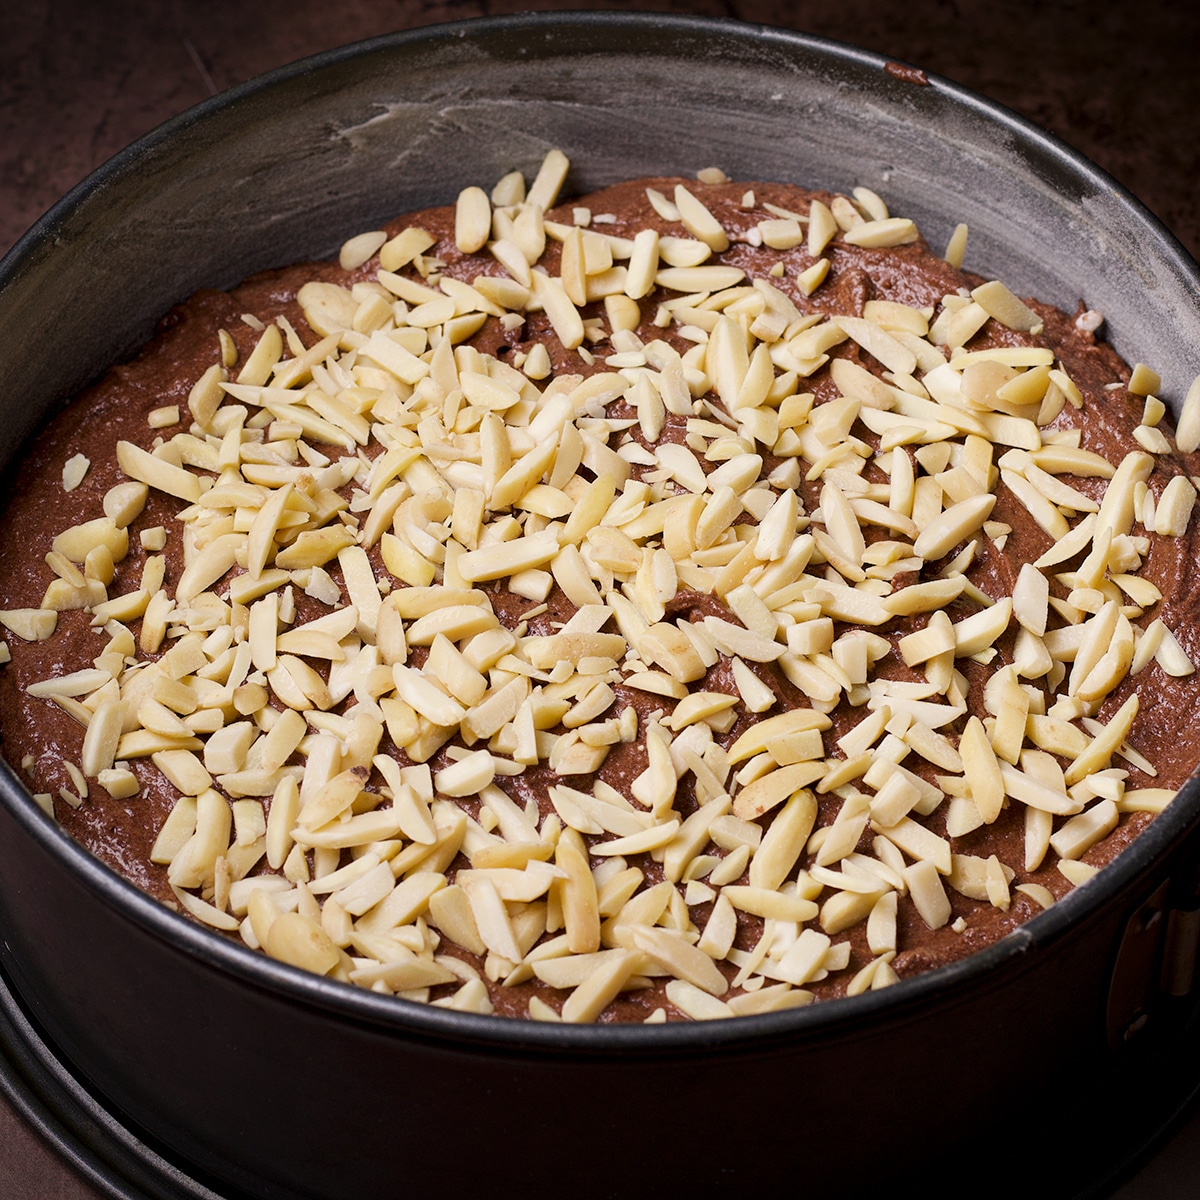 A springform cake pan filled with chocolate ricotta cake batter that's been sprinkled with slivered almonds.